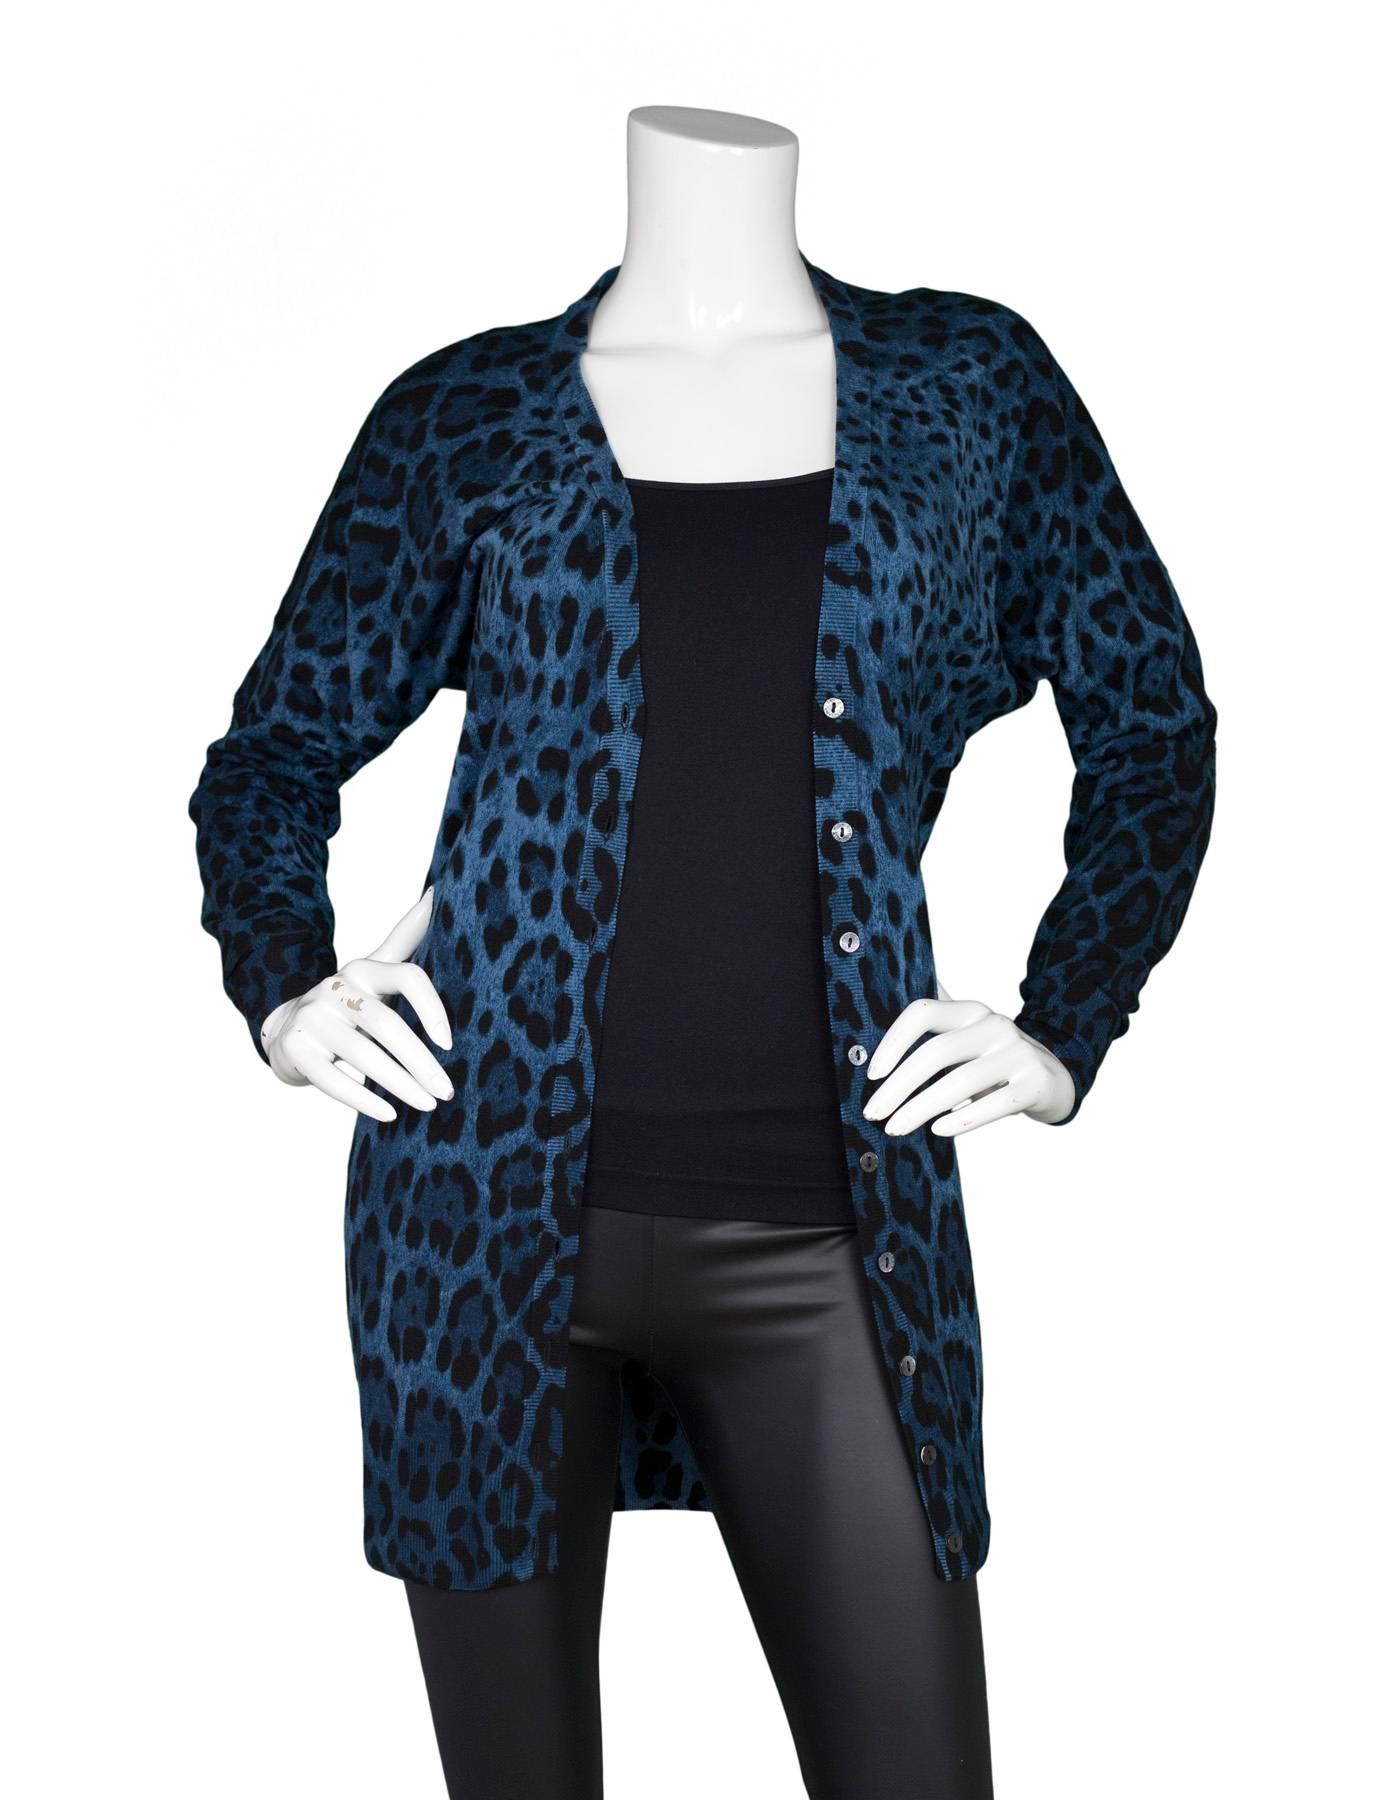 Dolce & Gabbana Blue & Black Leopard Print Wool Cardigan

Made In: Italy
Color: Black and blue leopard print
Composition: 100% virgin wool
Lining: None
Closure/Opening: Button down front
Exterior Pockets: None
Interior Pockets: None
Overall